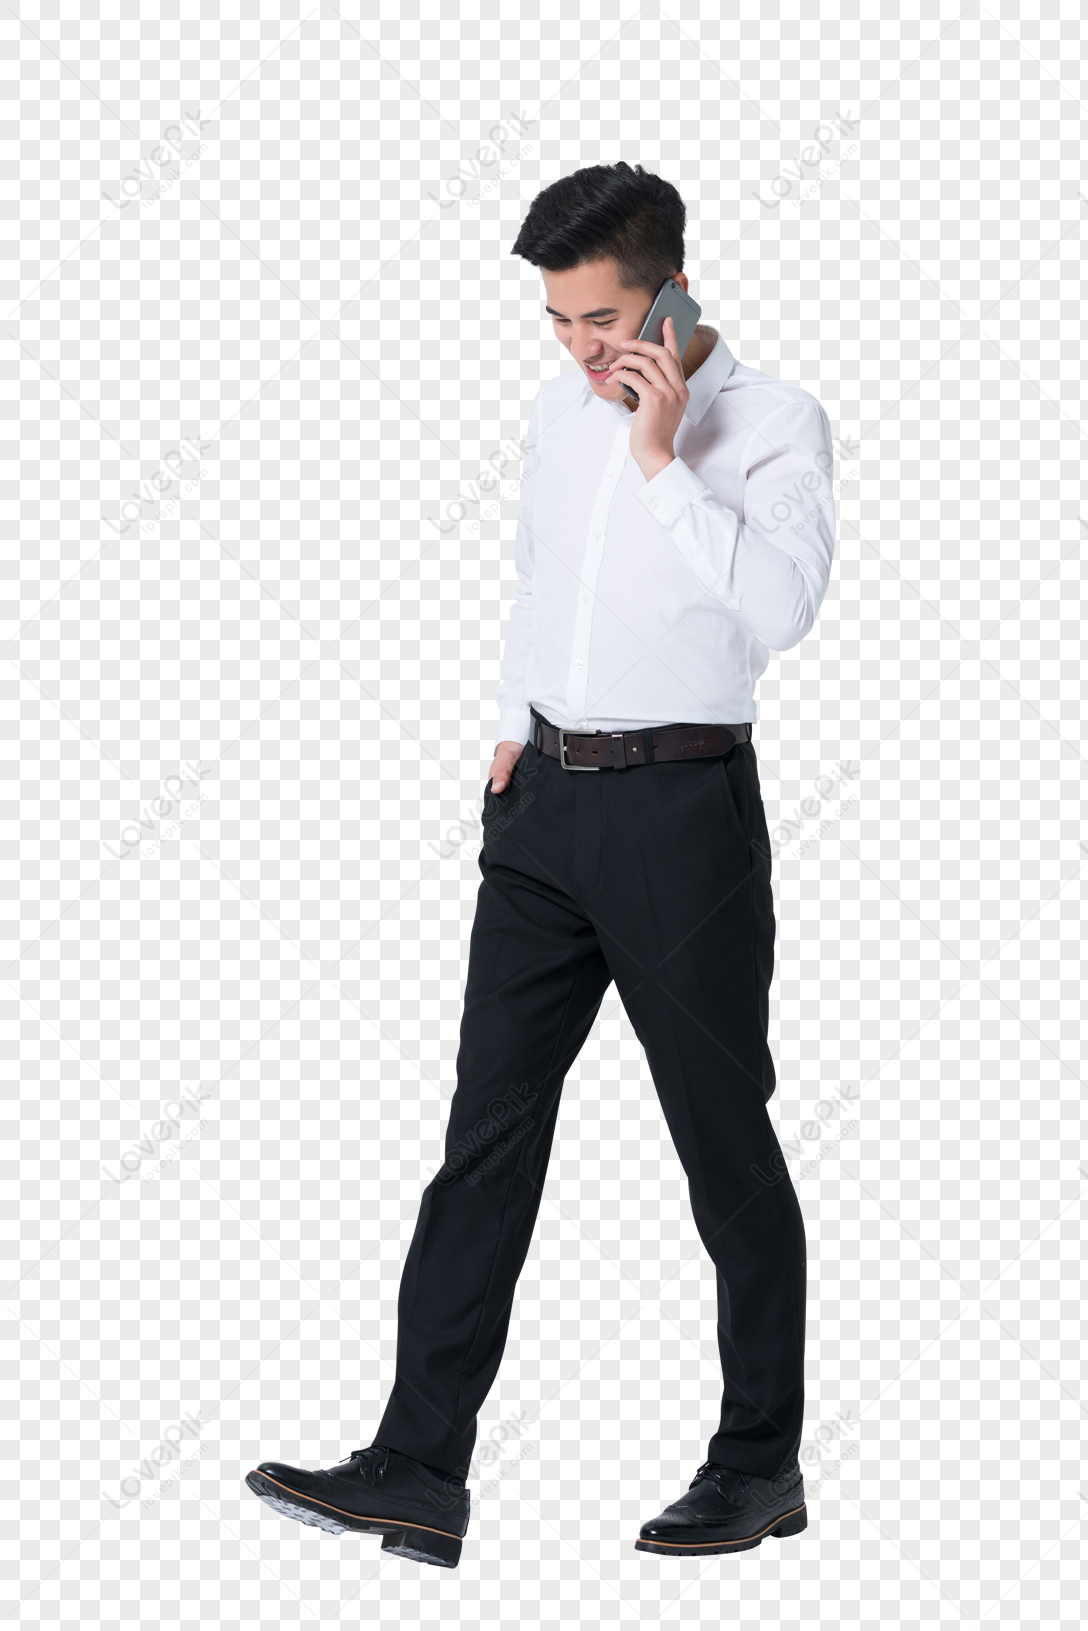 The Business Man Is Standing On The Phone With A Cell Phone PNG Transparent  Background And Clipart Image For Free Download - Lovepik | 400249010